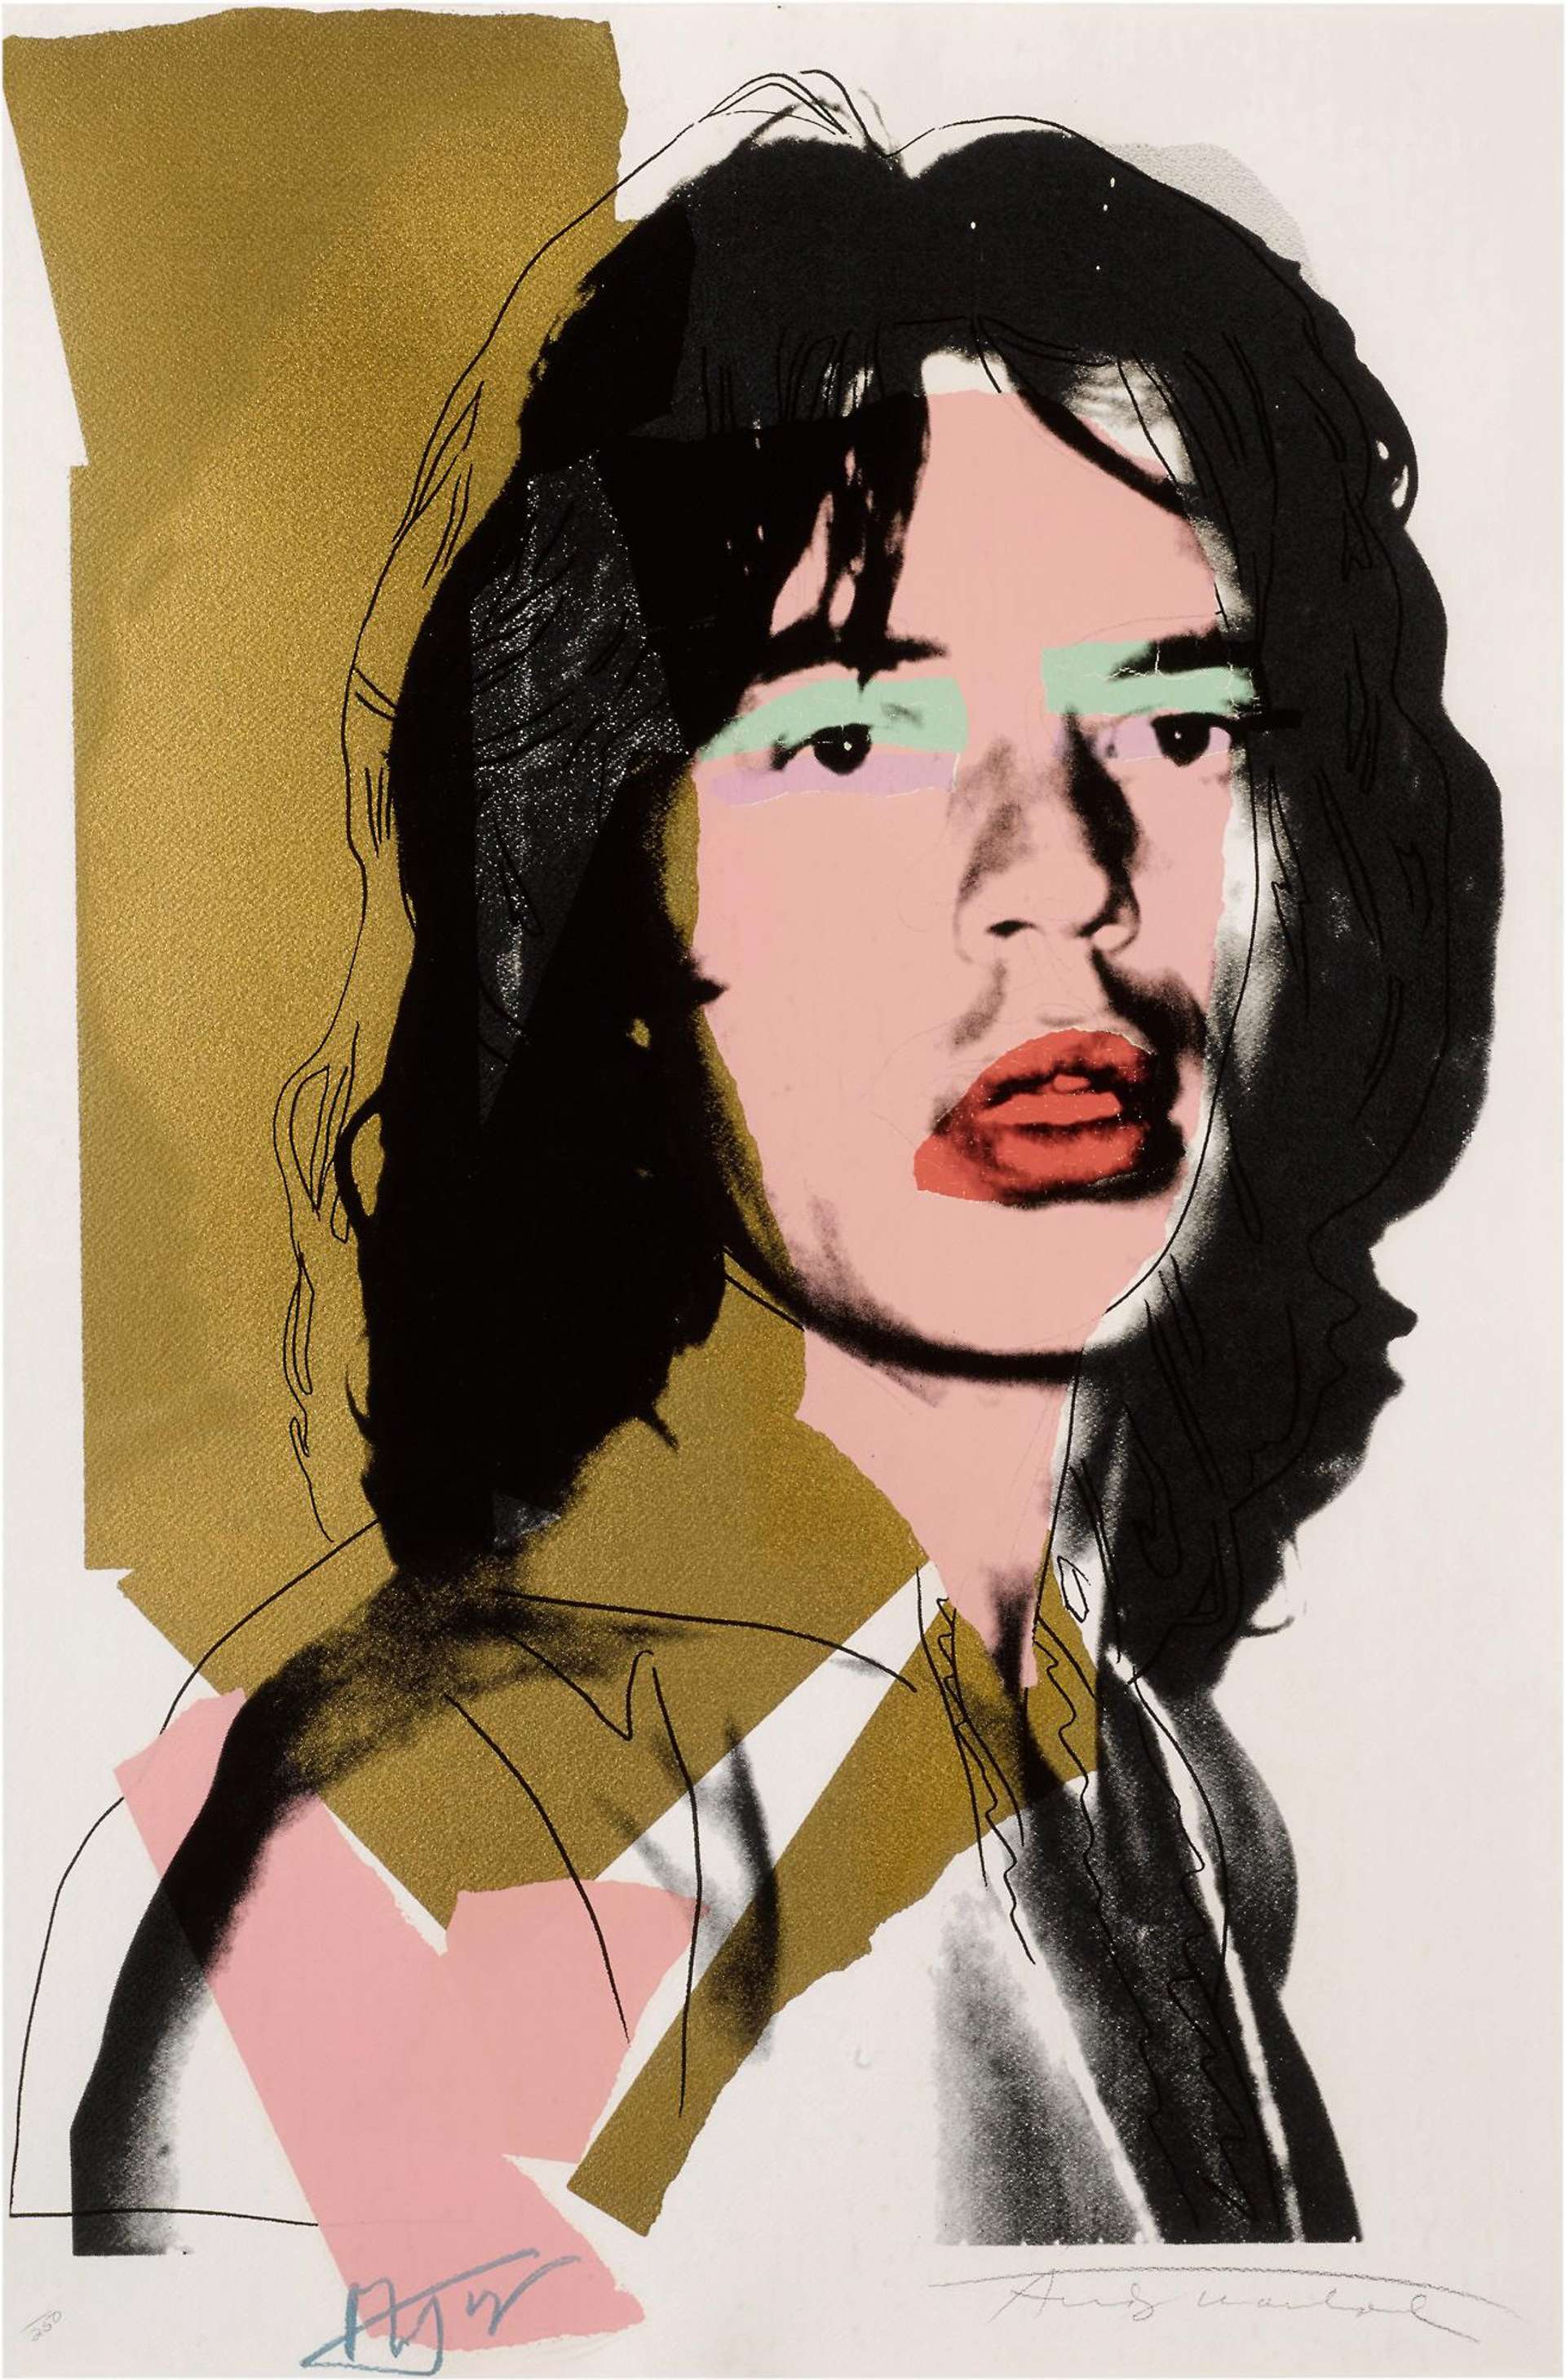 10 Facts About Andy Warhol's Mick Jagger